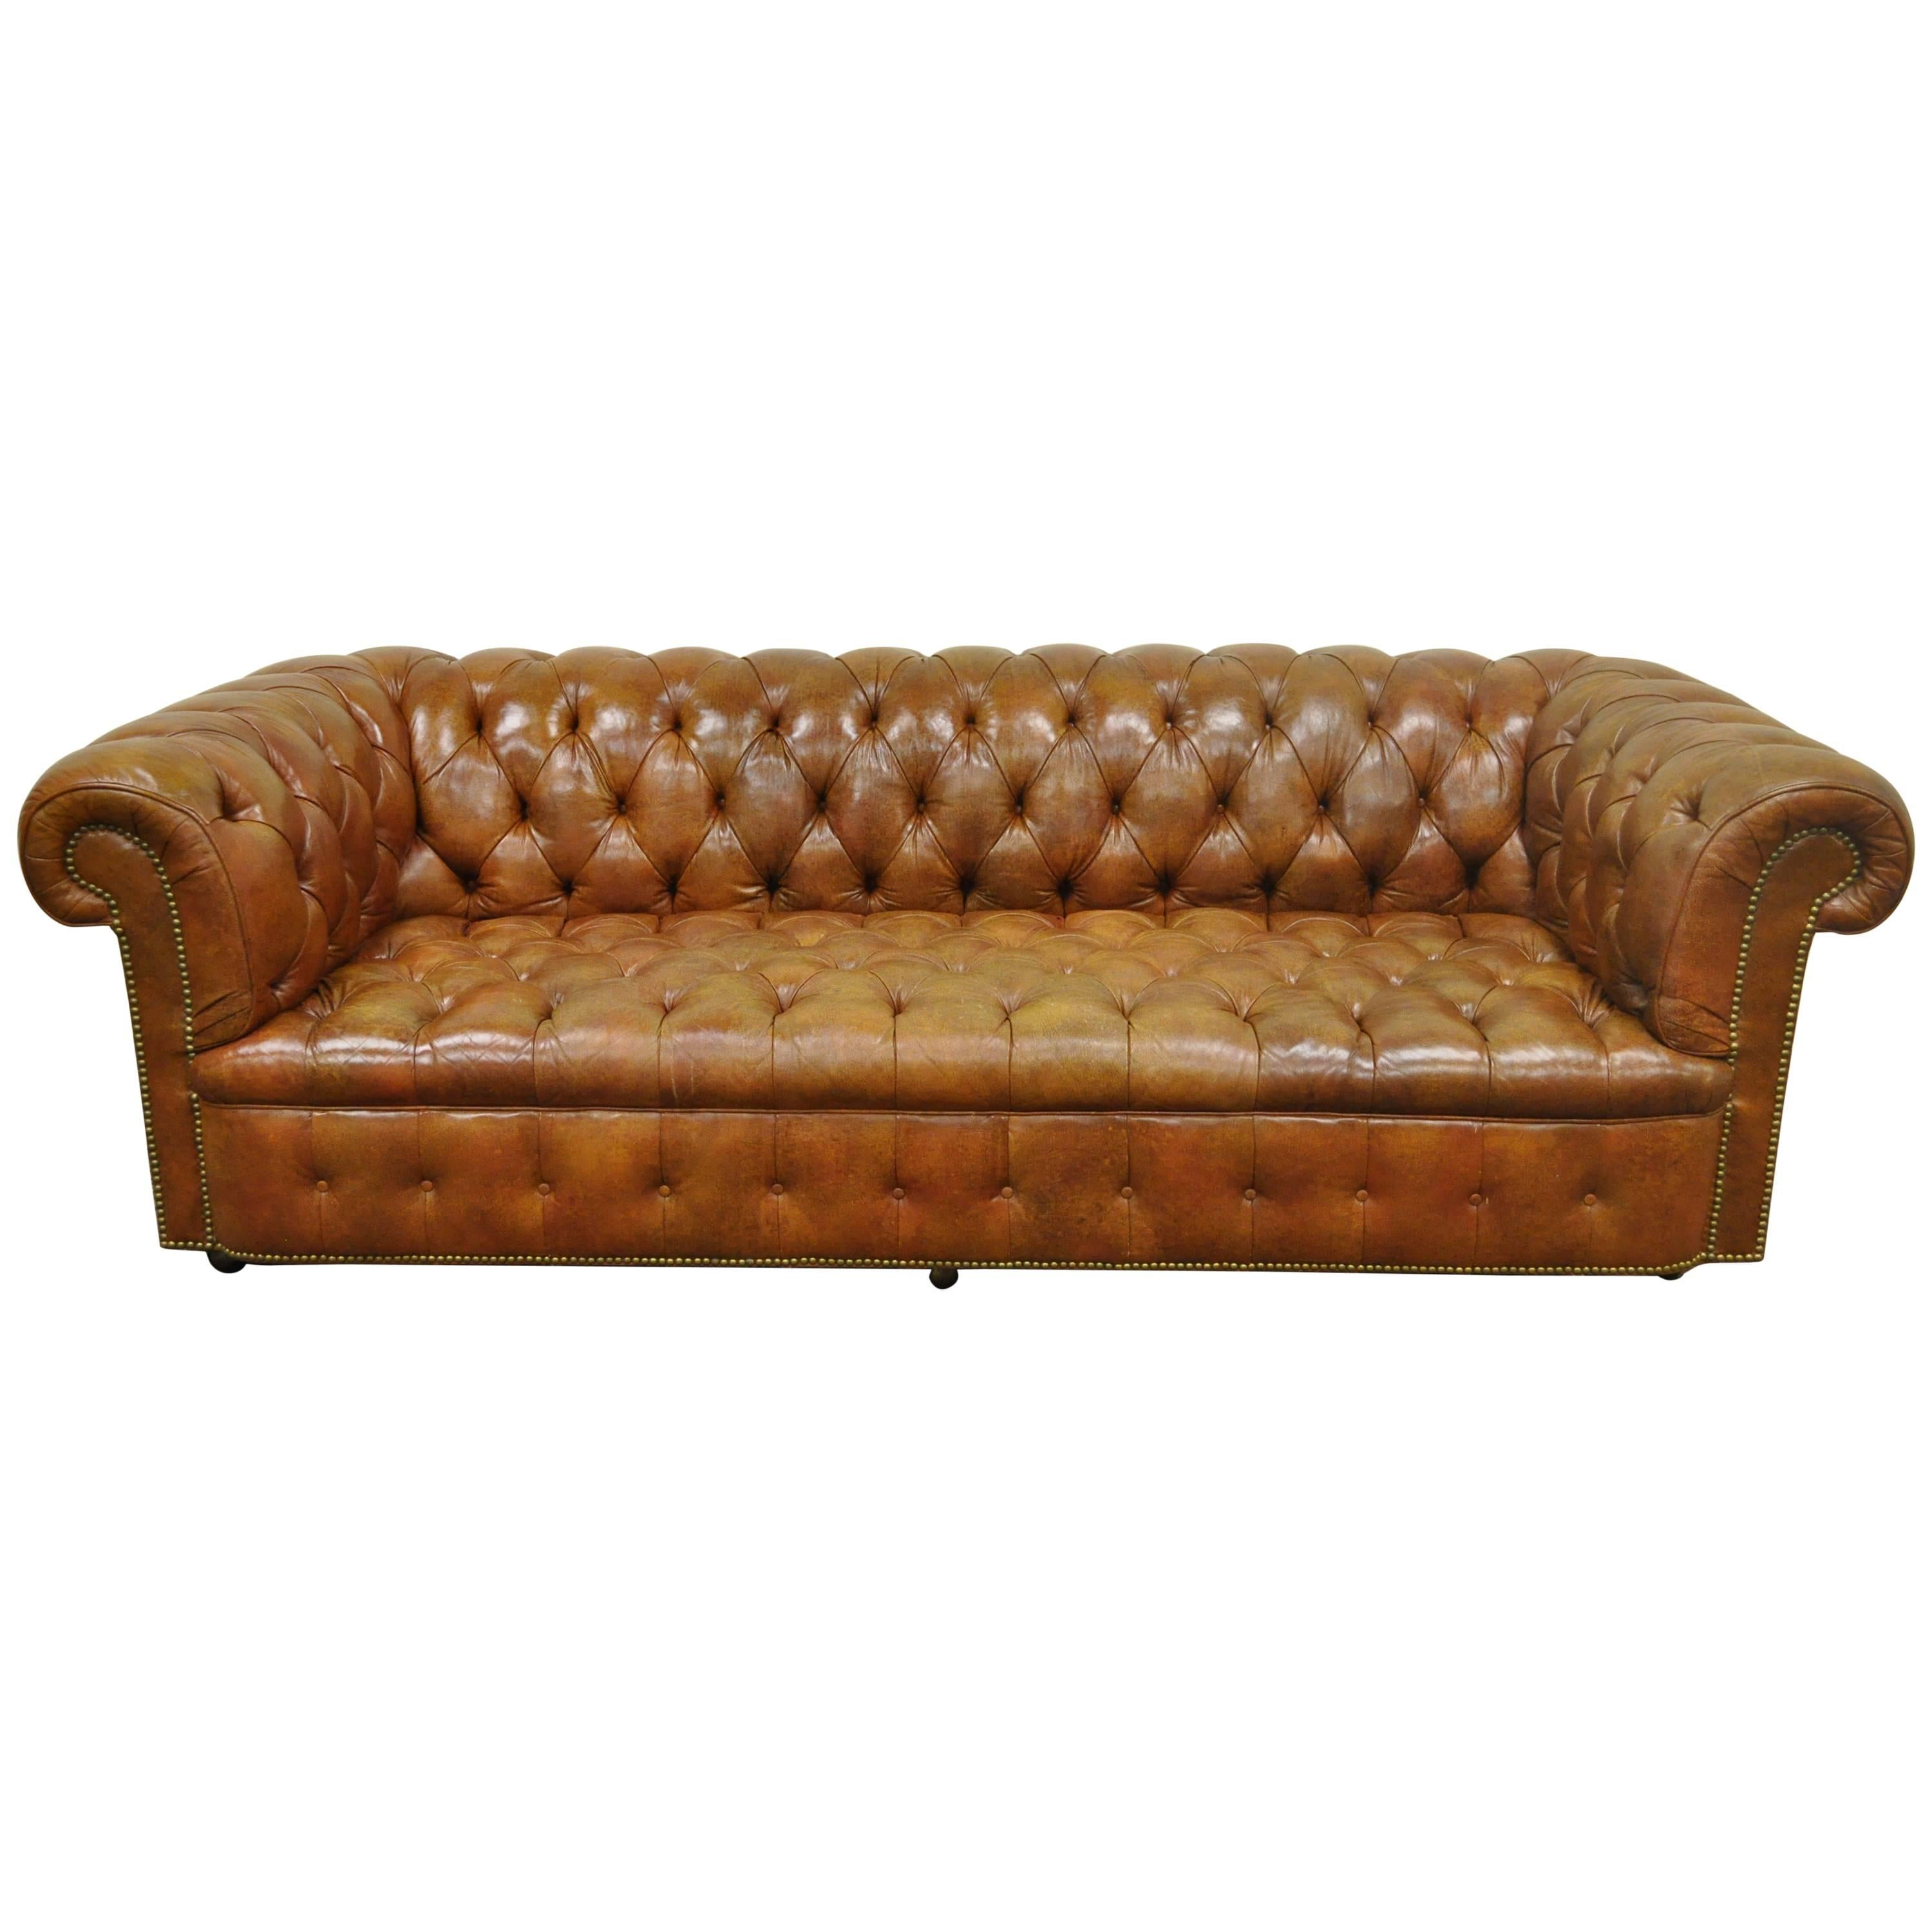 Henredon Rolled Arm English Style Button Tufted Brown Leather Chesterfield Sofa